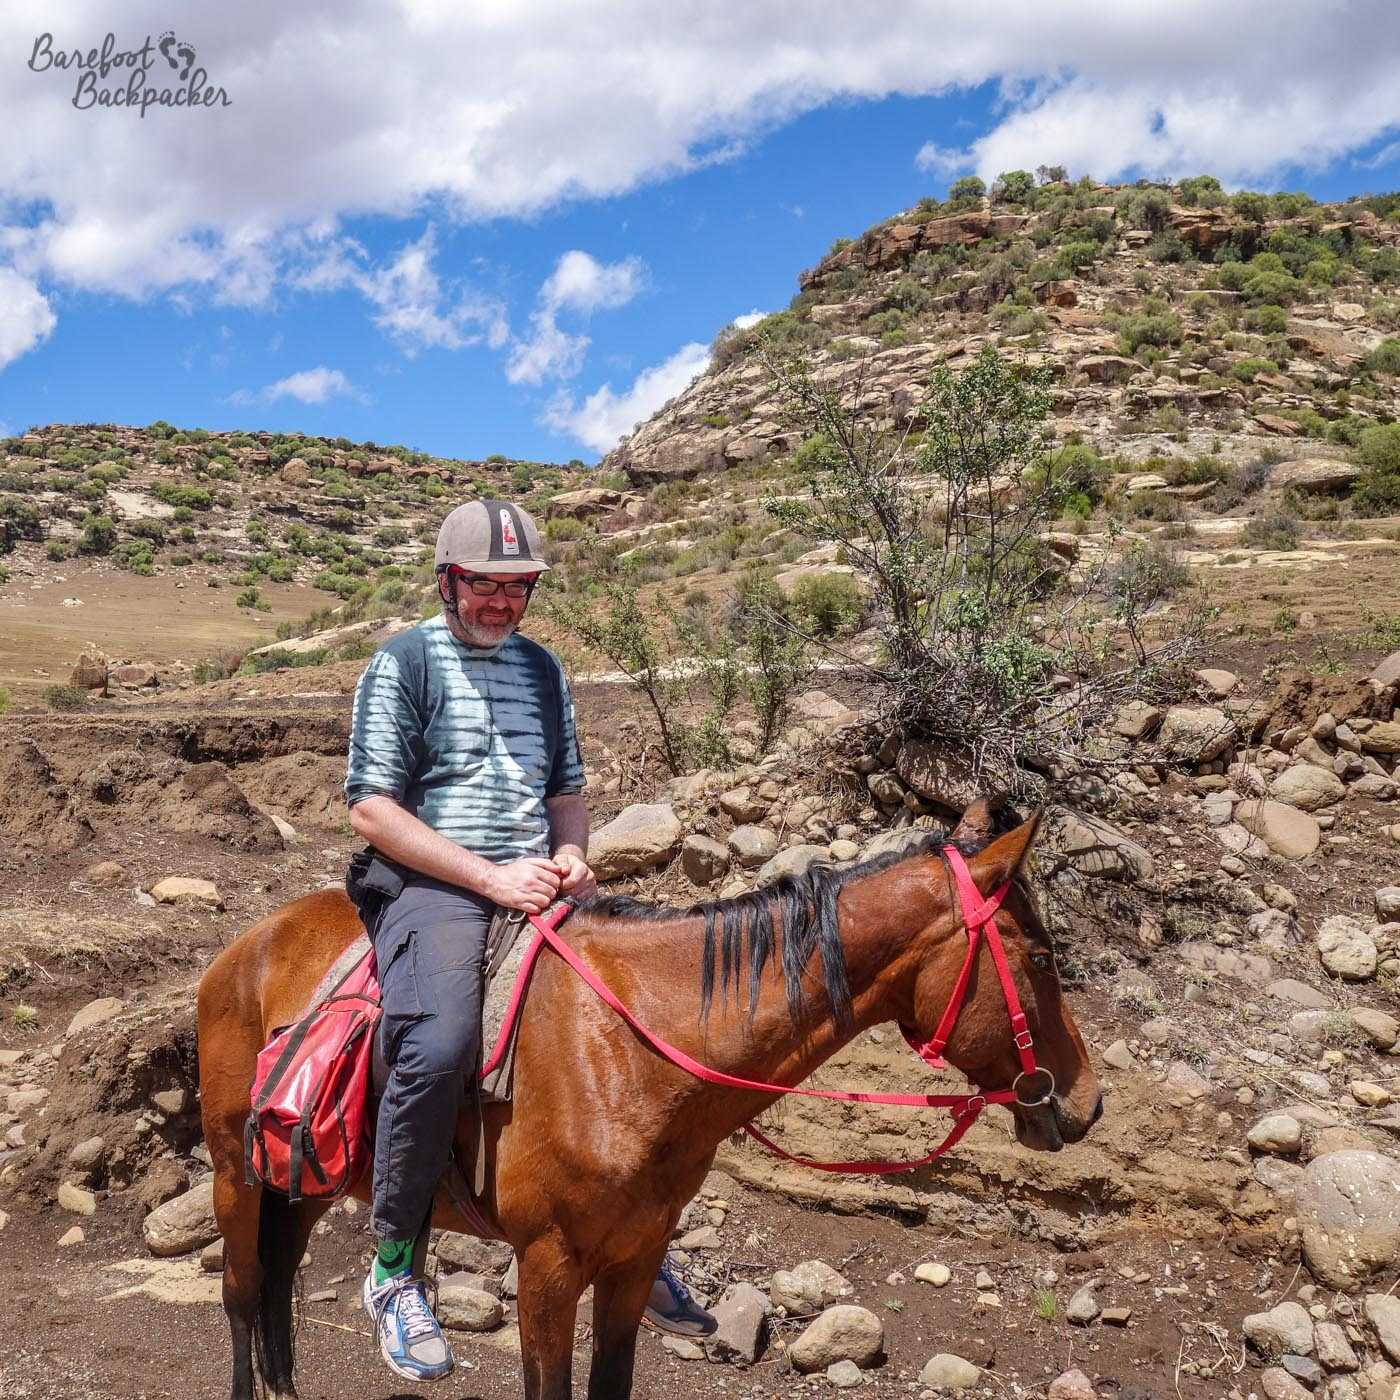 The Barefoot Backpacker, not barefoot, doesn't look entirely comfortable on top of a pony in the Lesotho rocky scenery. He is not a cowboy.